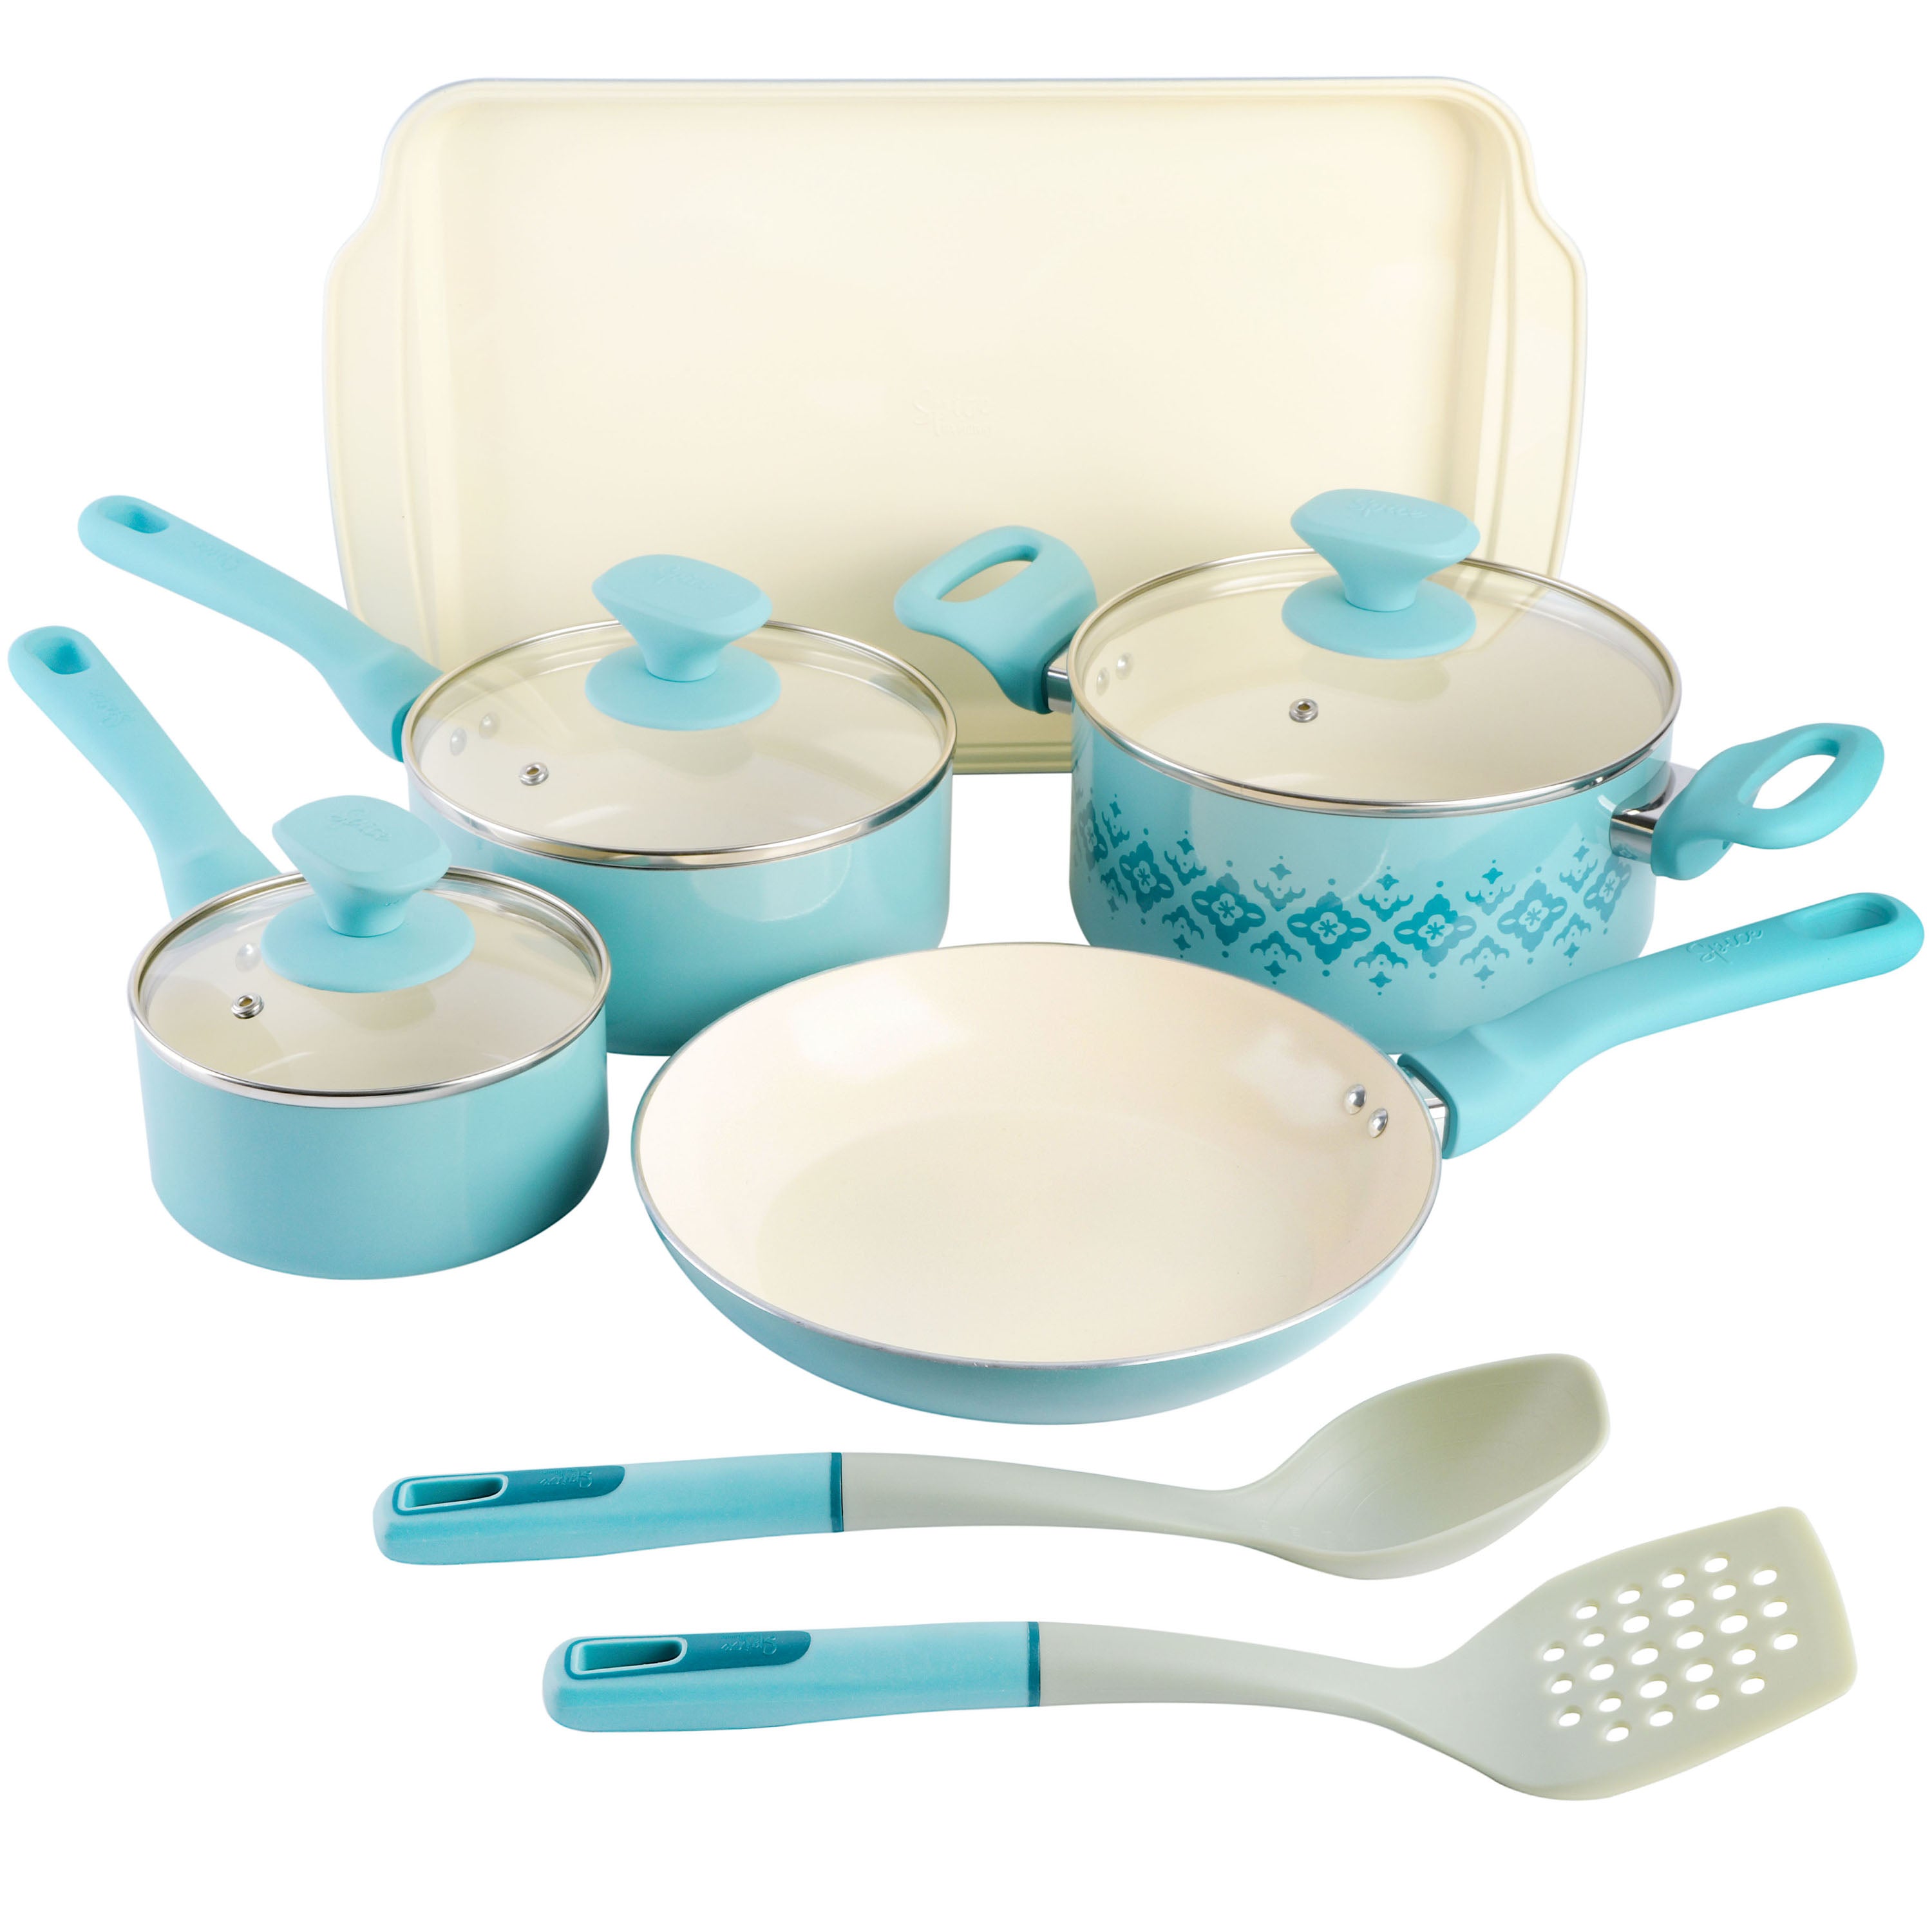 The Pioneer Woman Silicone Kitchen Utensils, 10 Piece Set, Blue, Wood  Handle NEW